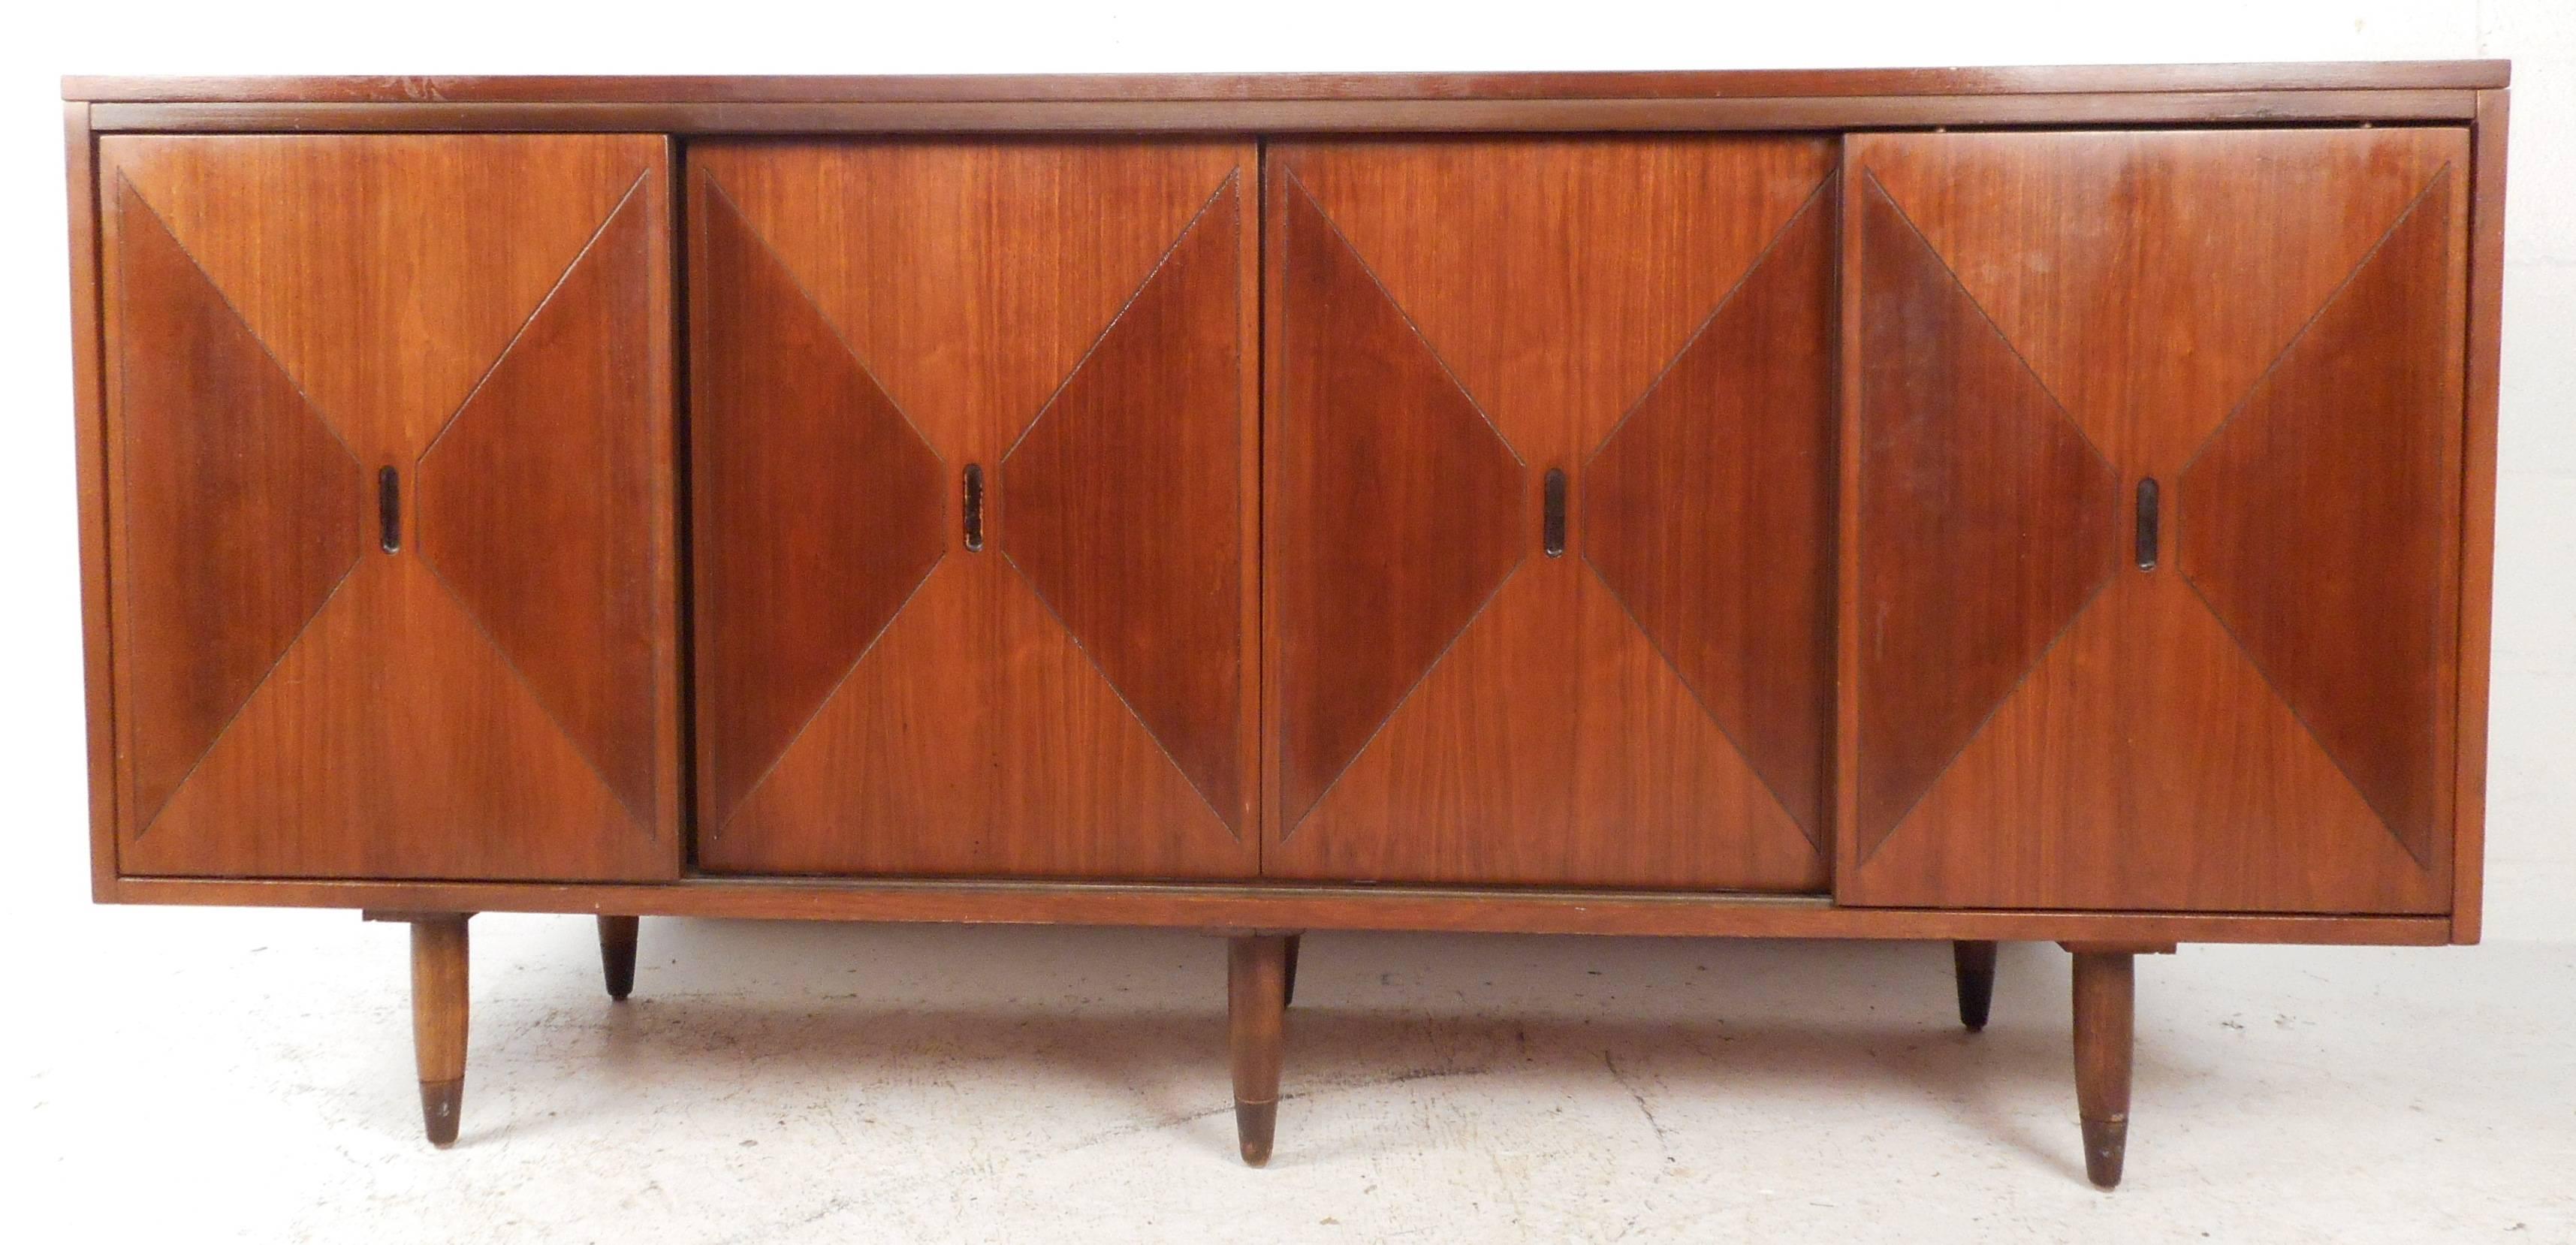 Stunning modern walnut credenza or server features graphical rosewood inlays on the sliding door fronts. Stylish brass capped feet and abundance of storage space make it perfect for any setting. Please confirm item location (NY or NJ).